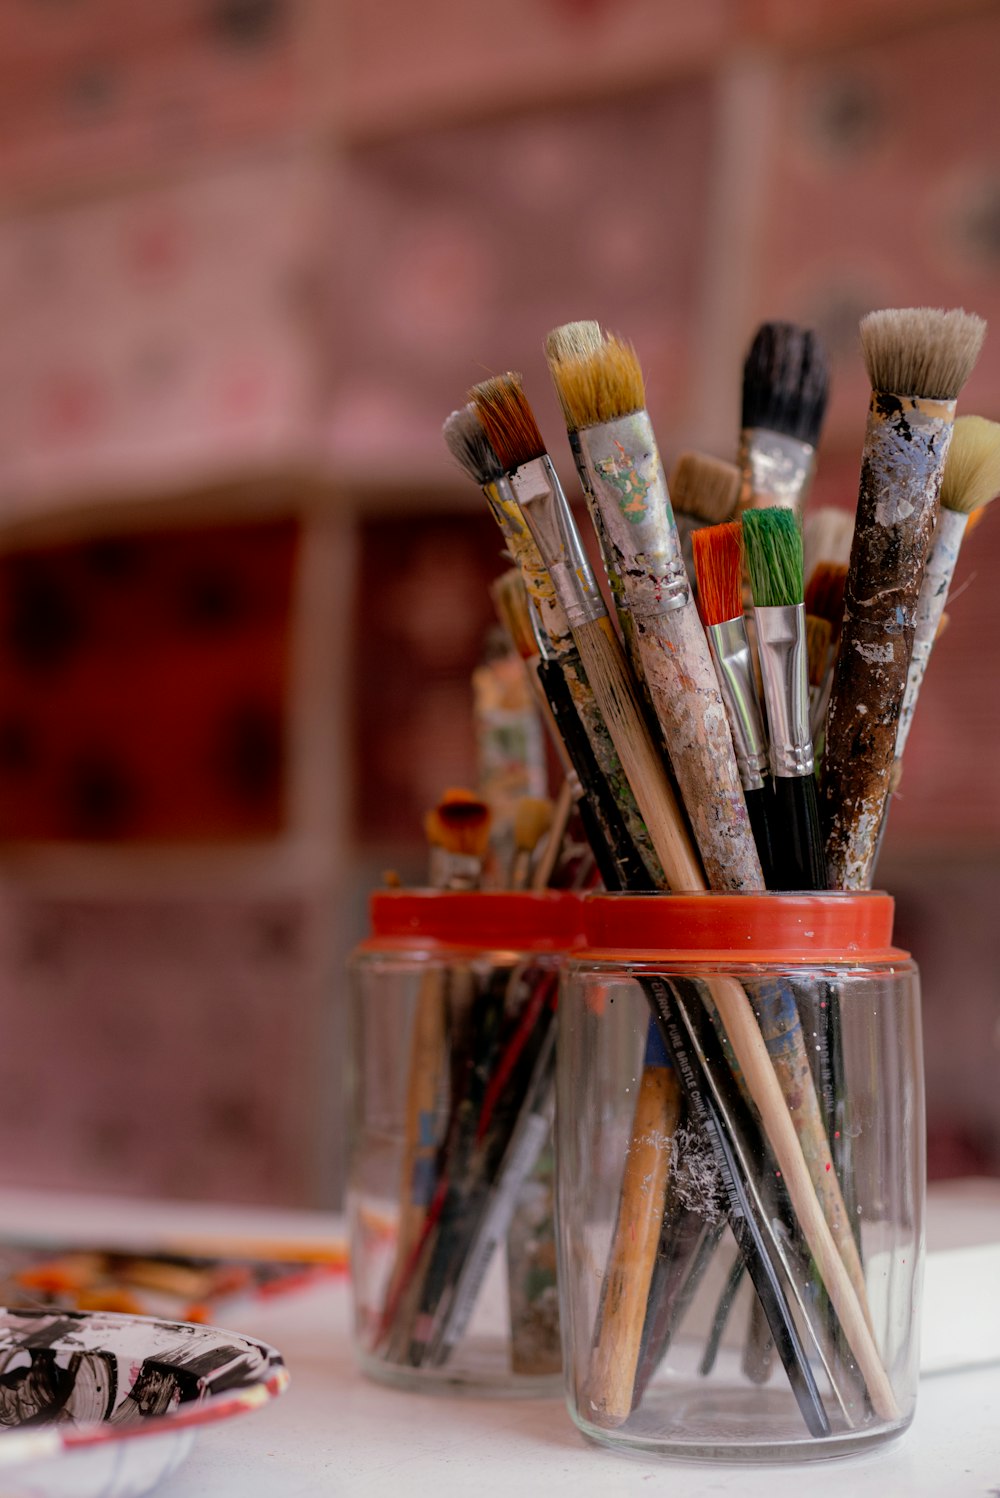 Paint Brushes Pictures | Download Free Images on Unsplash